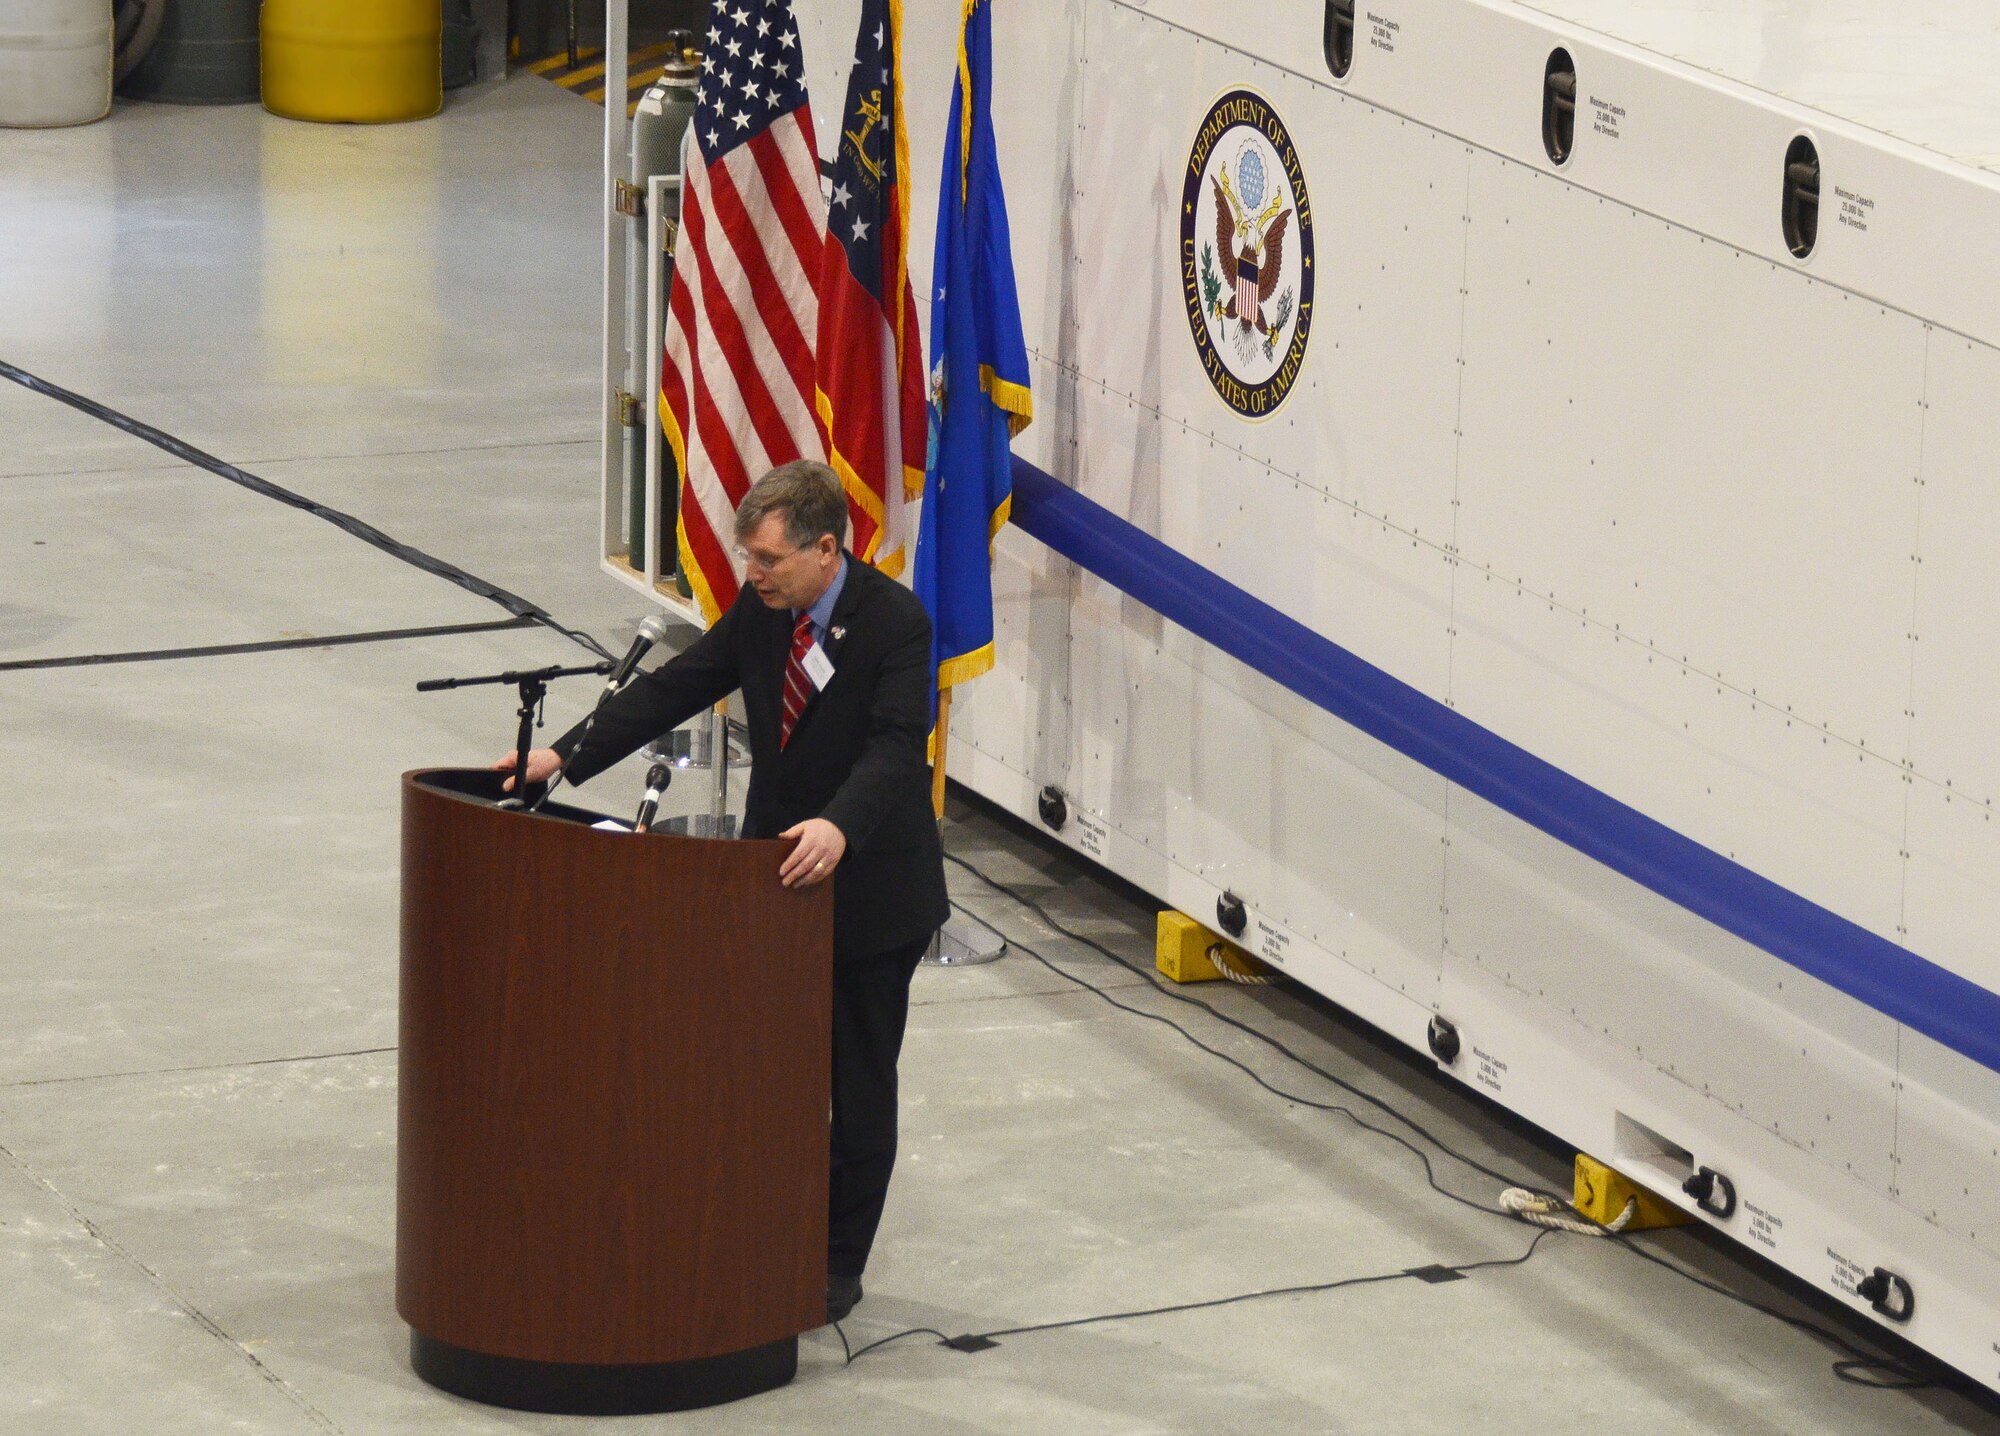 Patrick Kennedy, Under Secretary of Management, from the United States Department of State, addresses an audience of personnel from the Department of State, MRI Global, Paul Allen Foundation, and members of the 94th Airlift Wing, at an unveiling of the DOS Containerized Biocontainment System, held at Dobbins Air Reserve Base, Ga. Aug. 11, 2015. (U.S. Air Force photo/Don Peek)